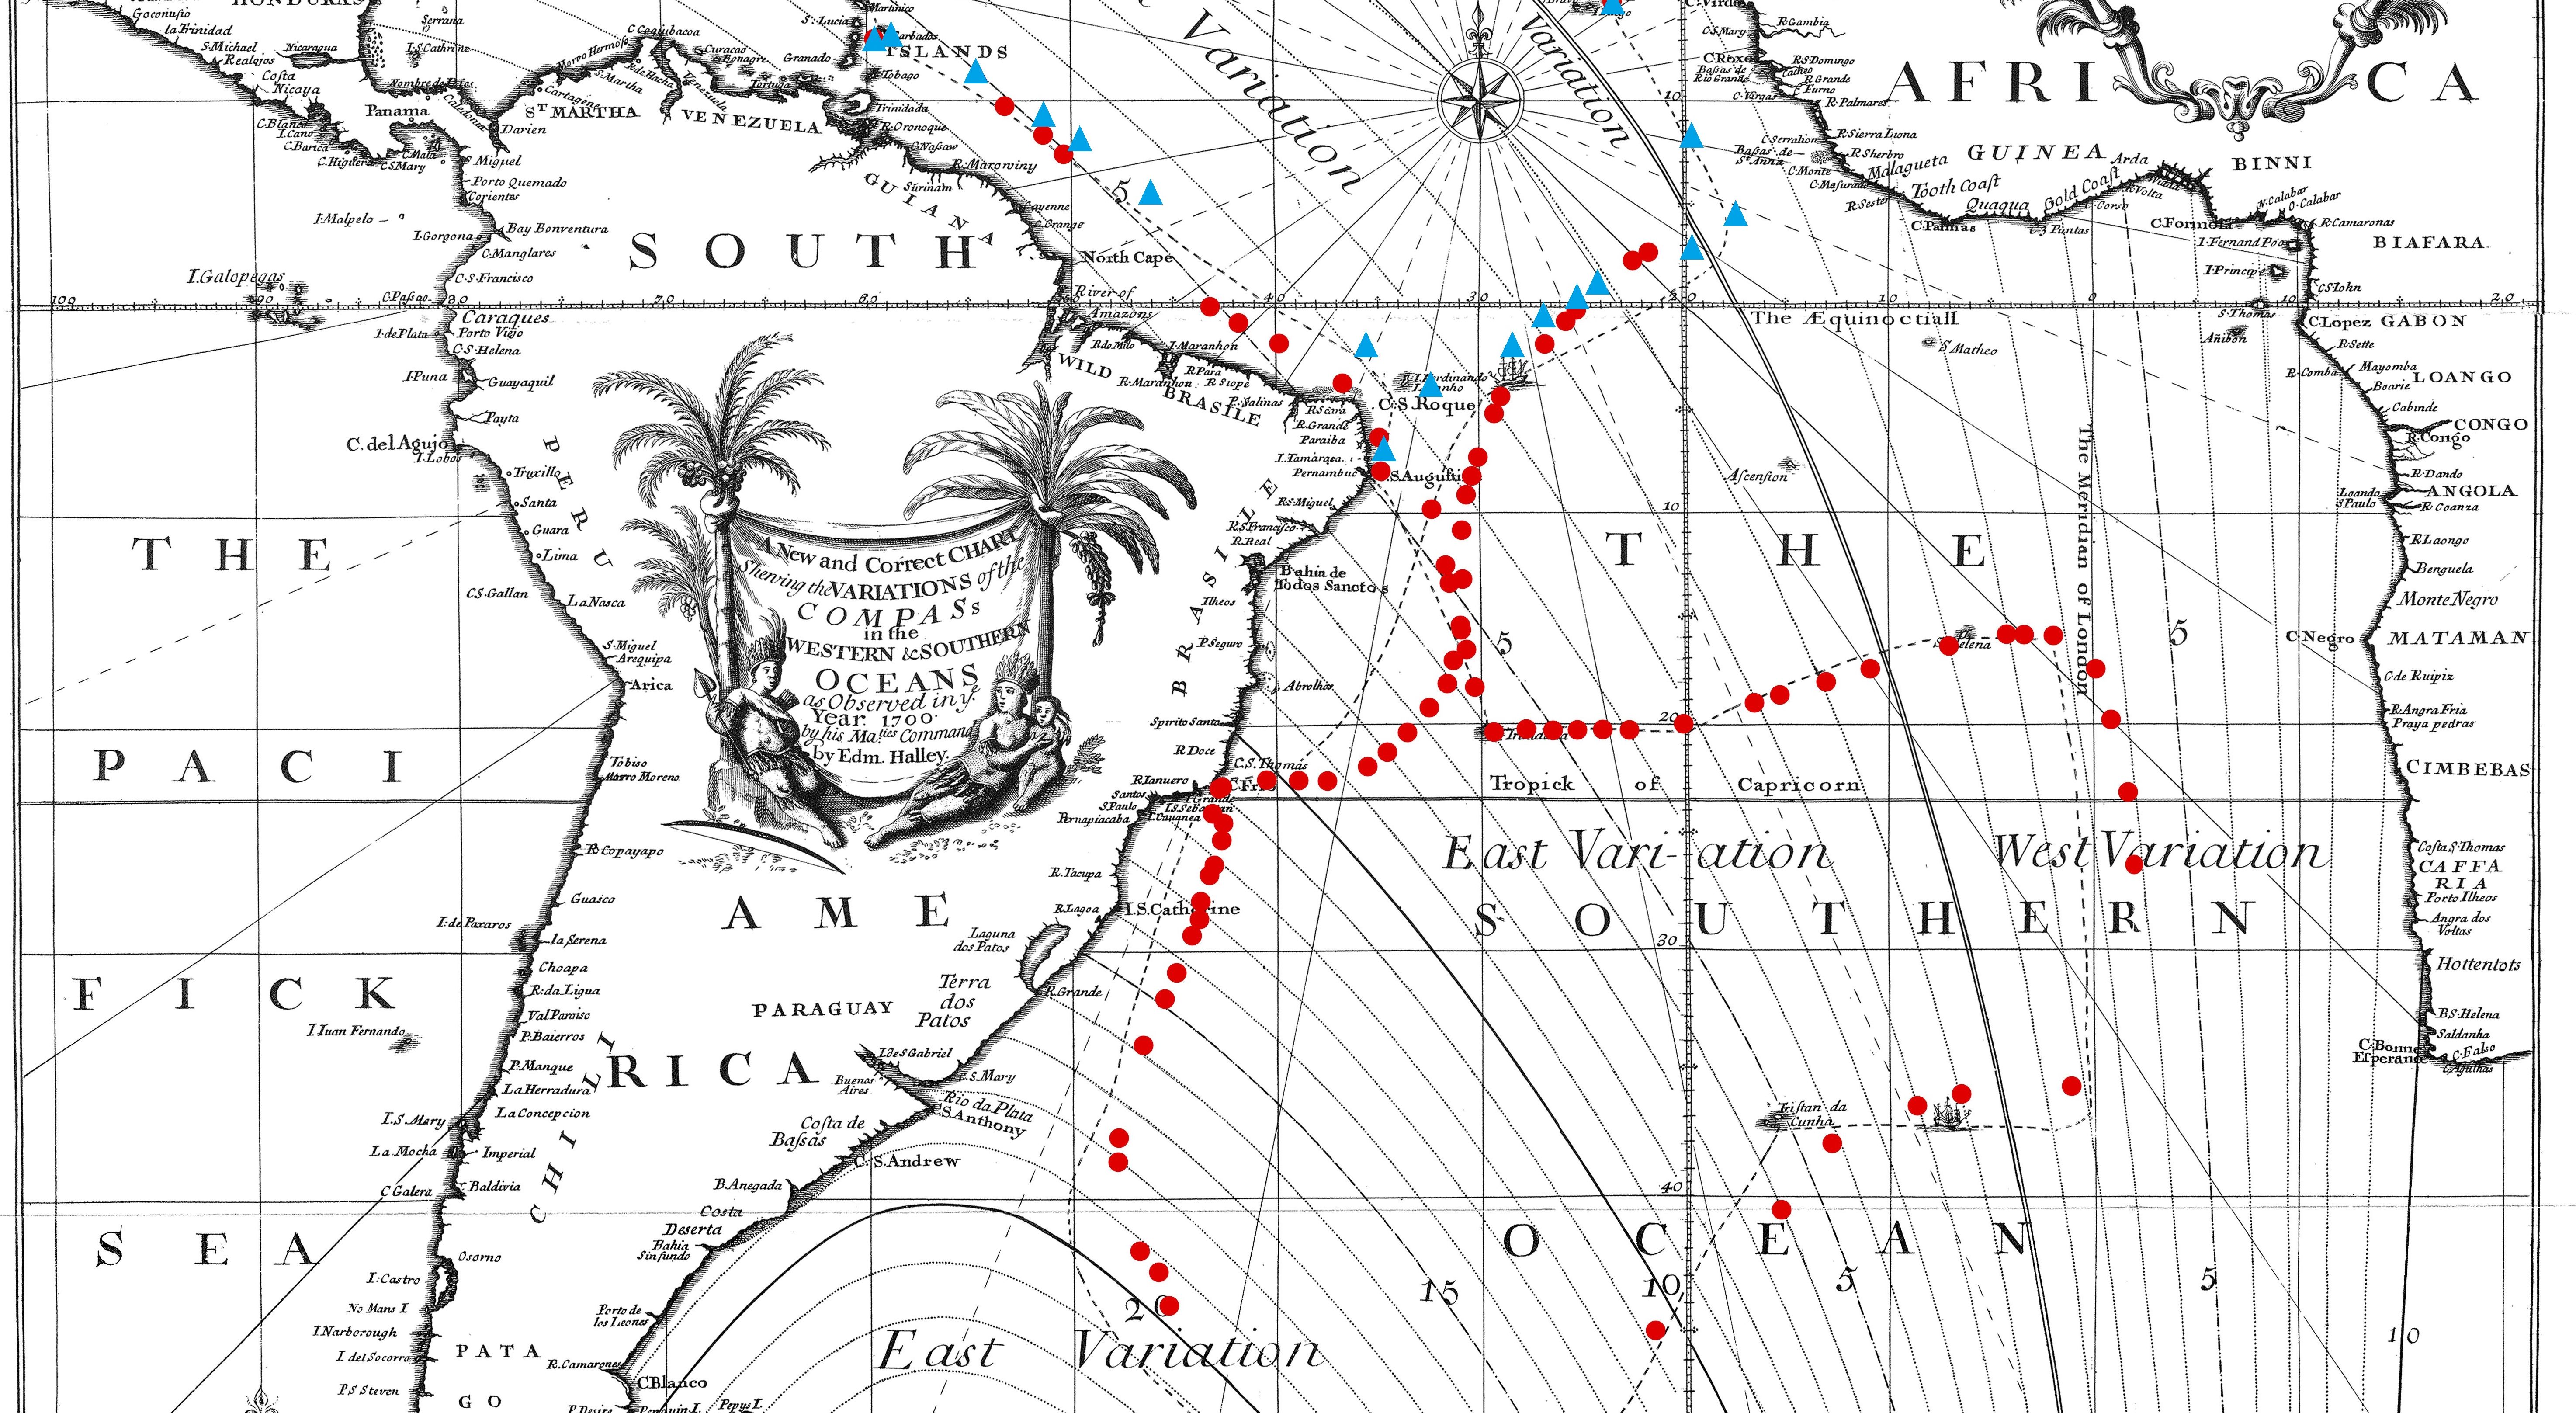 Detail showing Halley’s observations: This figure shows the central portion of Halley’s map with the locations of his observations.